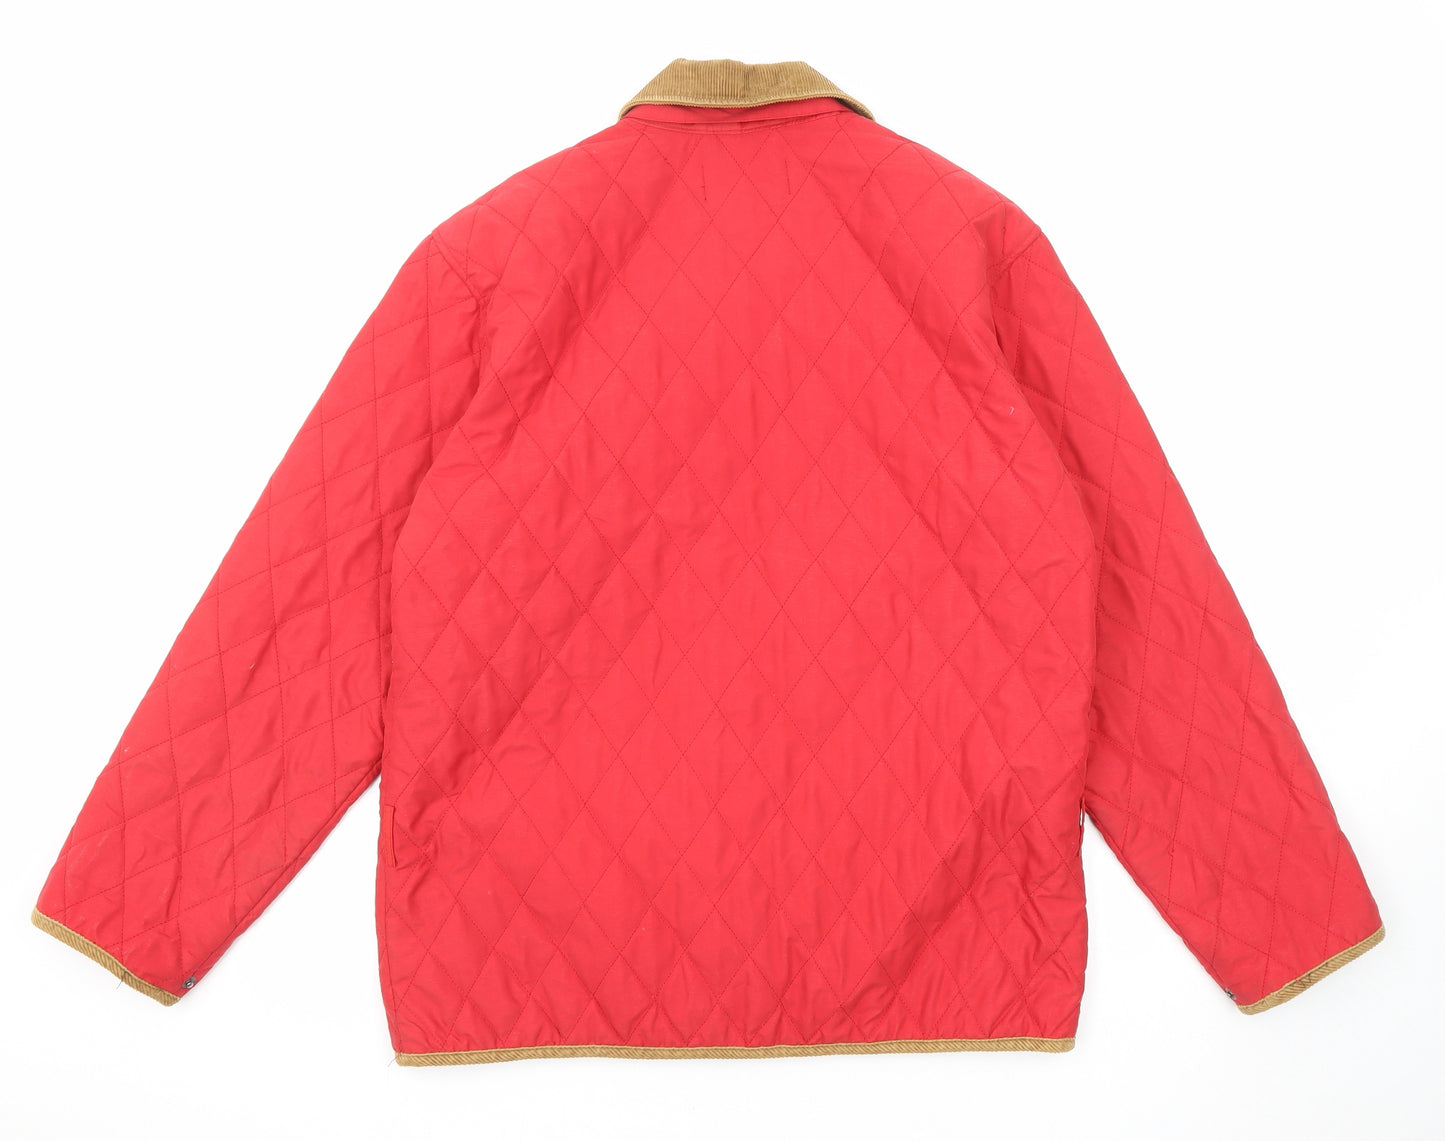 Lawrence Grey Womens Red Quilted Jacket Size 12 Snap